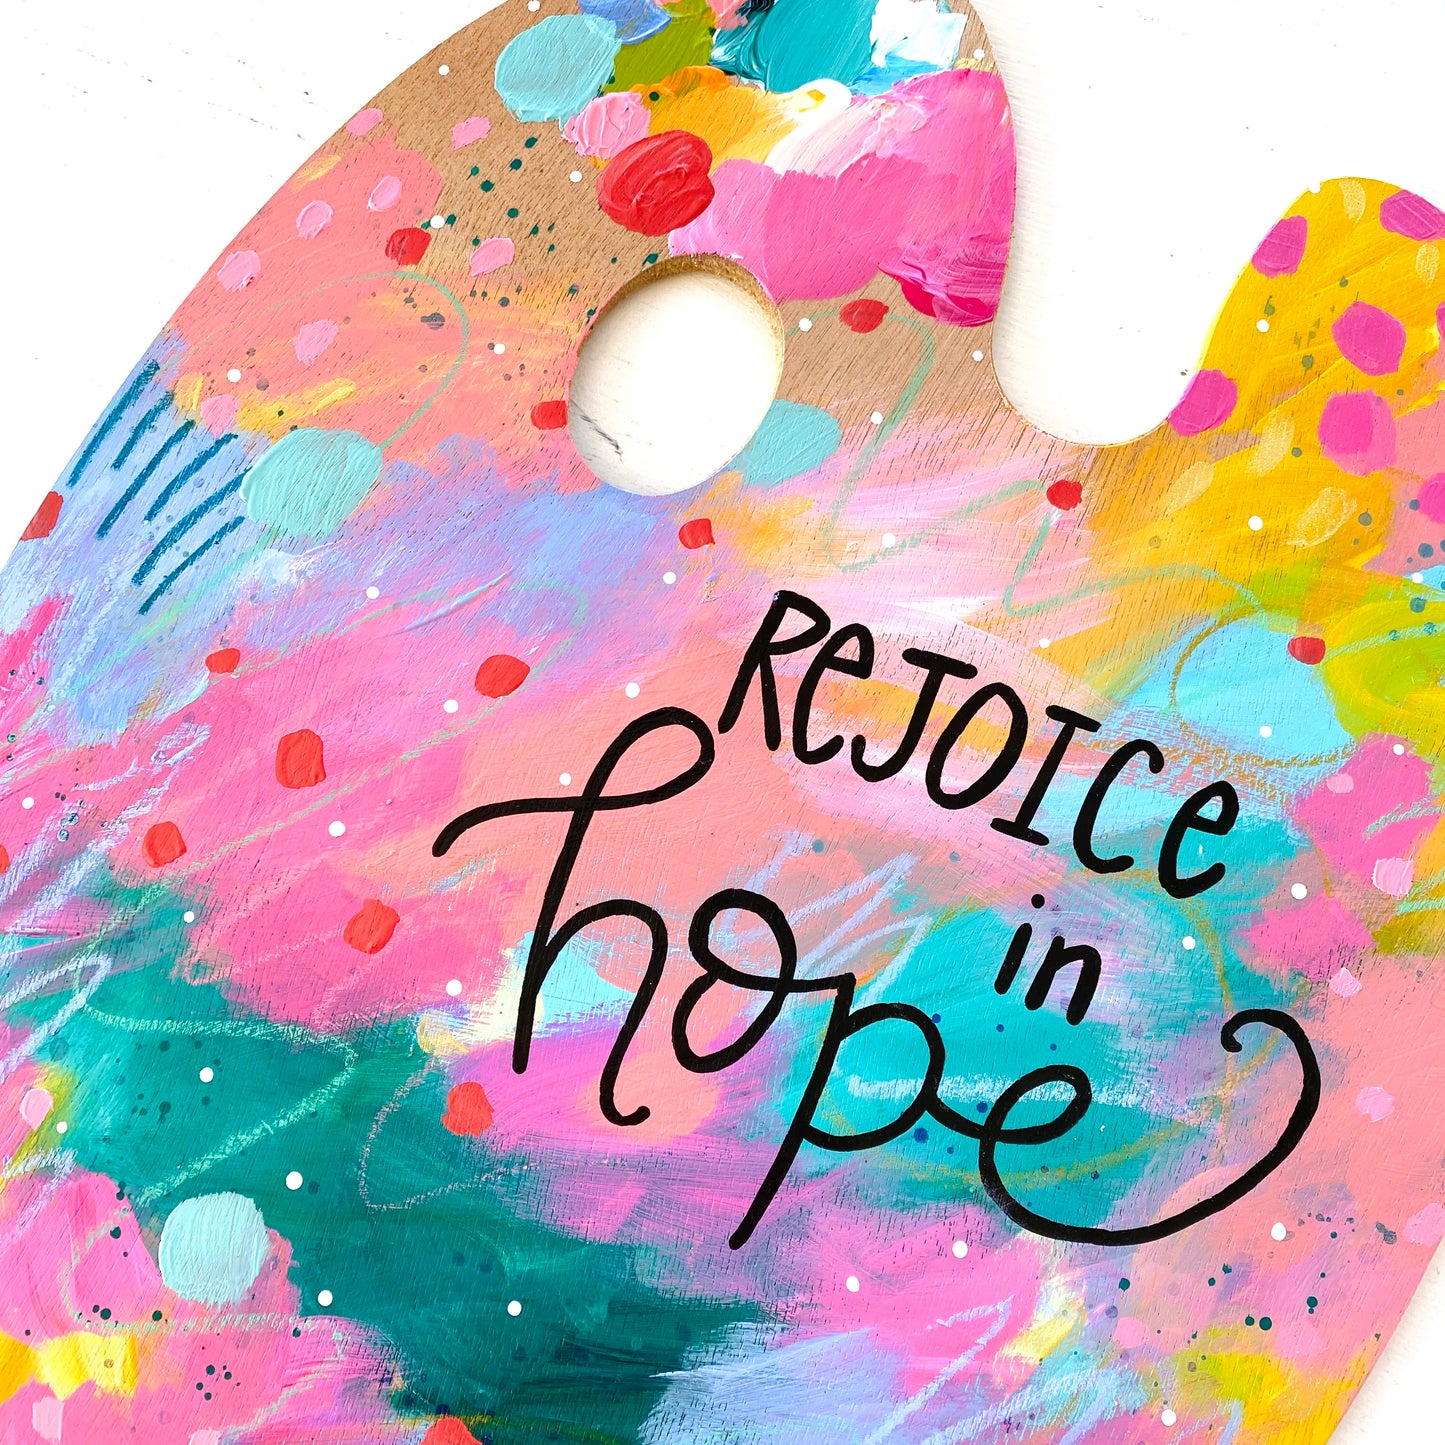 Paint Palette Original Painting 12 Days of Christmas Day 6 “Rejoice in Hope”